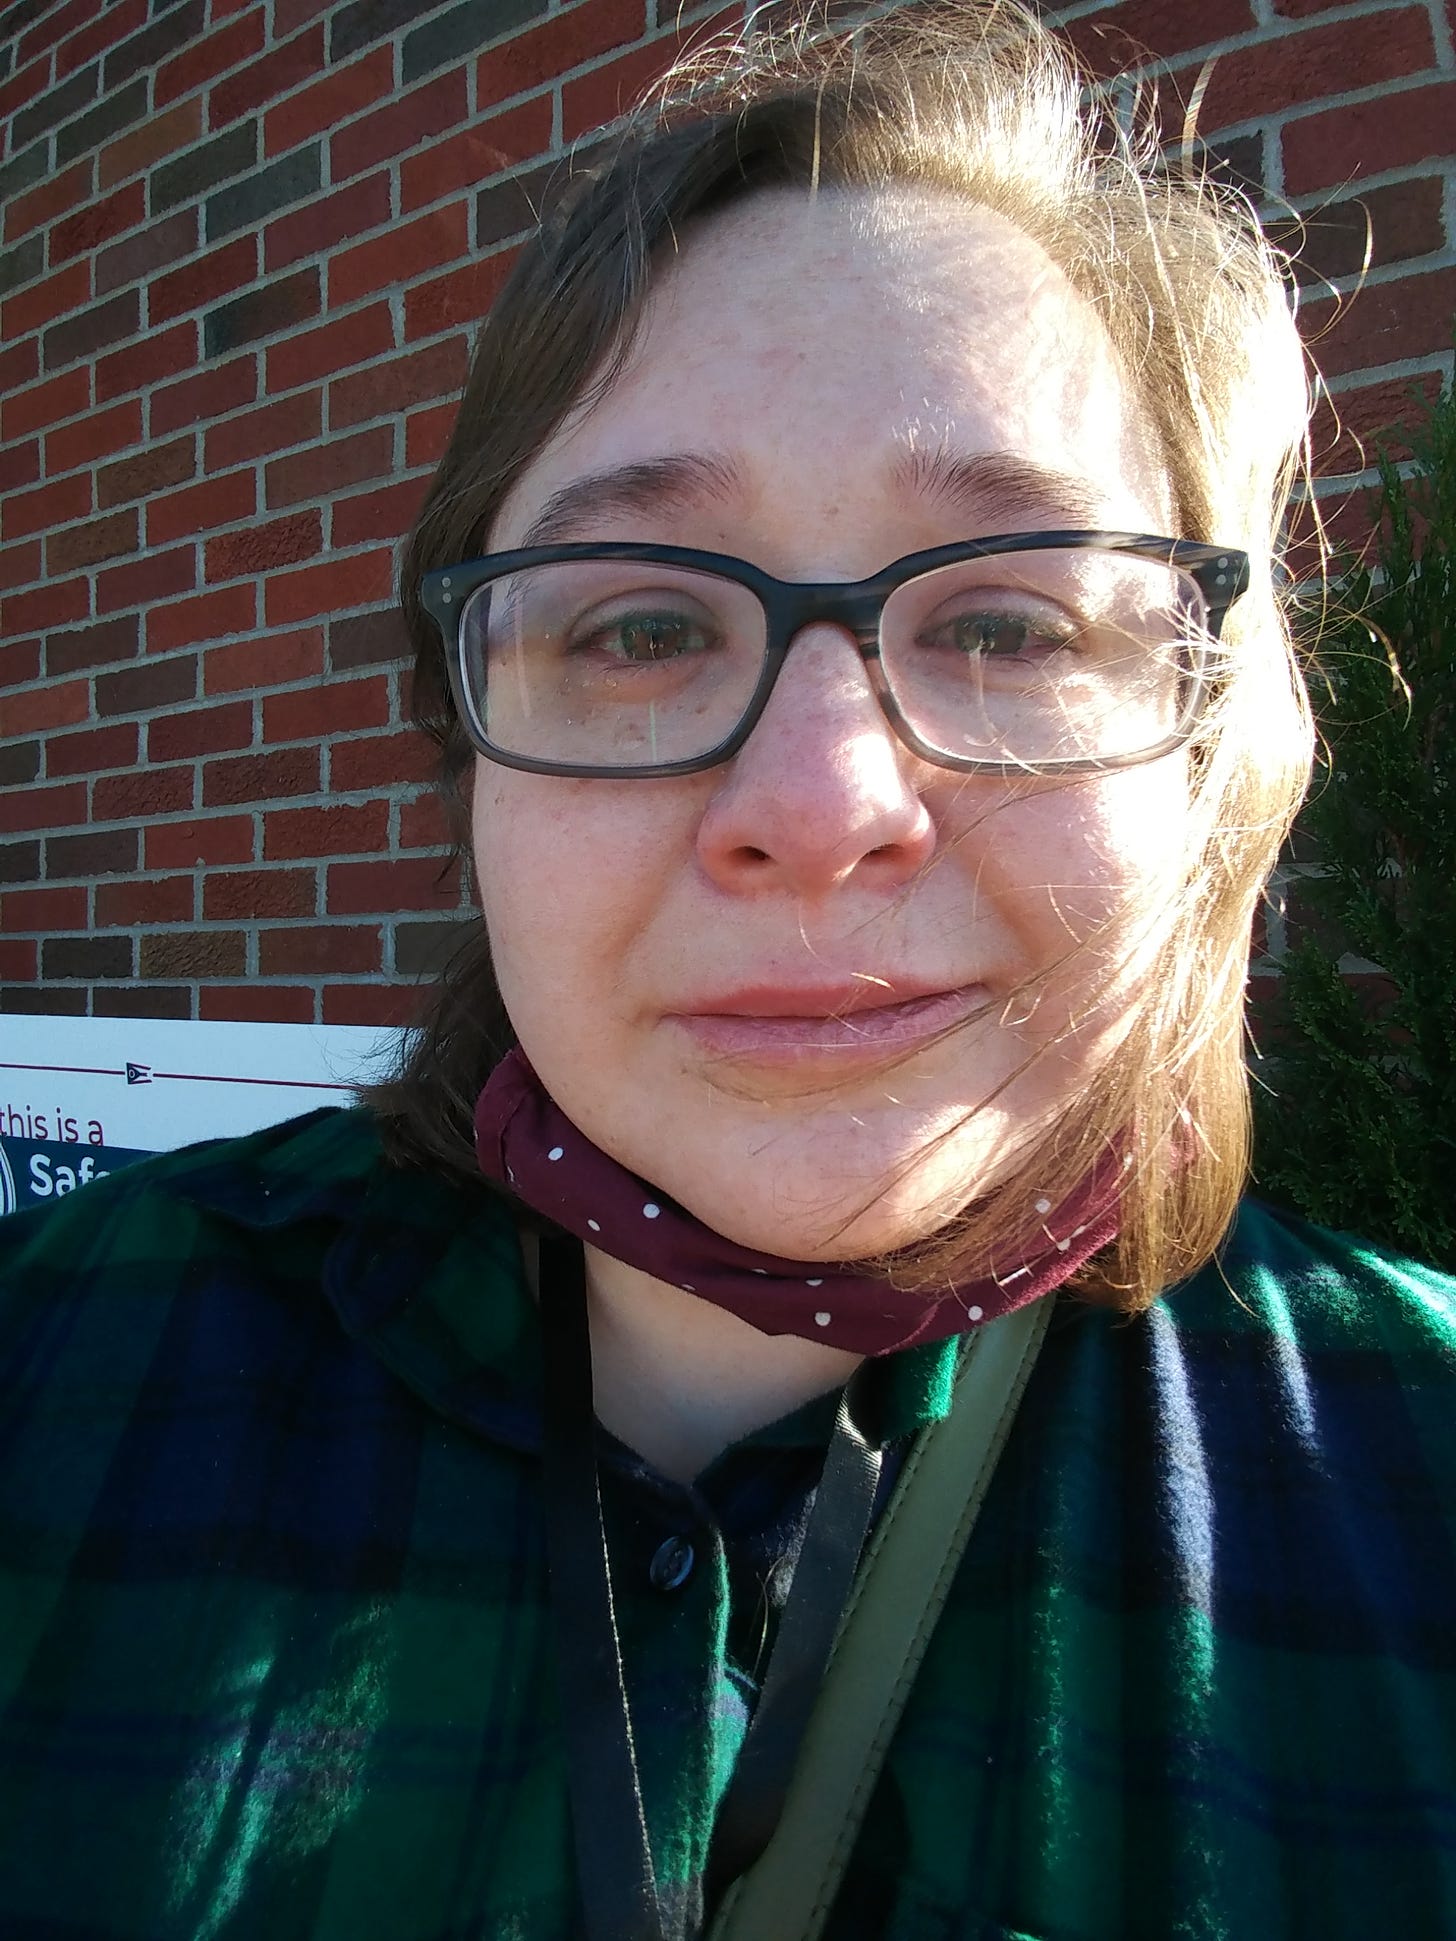 A teary-eyed Lyndsey wearing glasses and a flannel shirt, with her mask pulled under her chin.